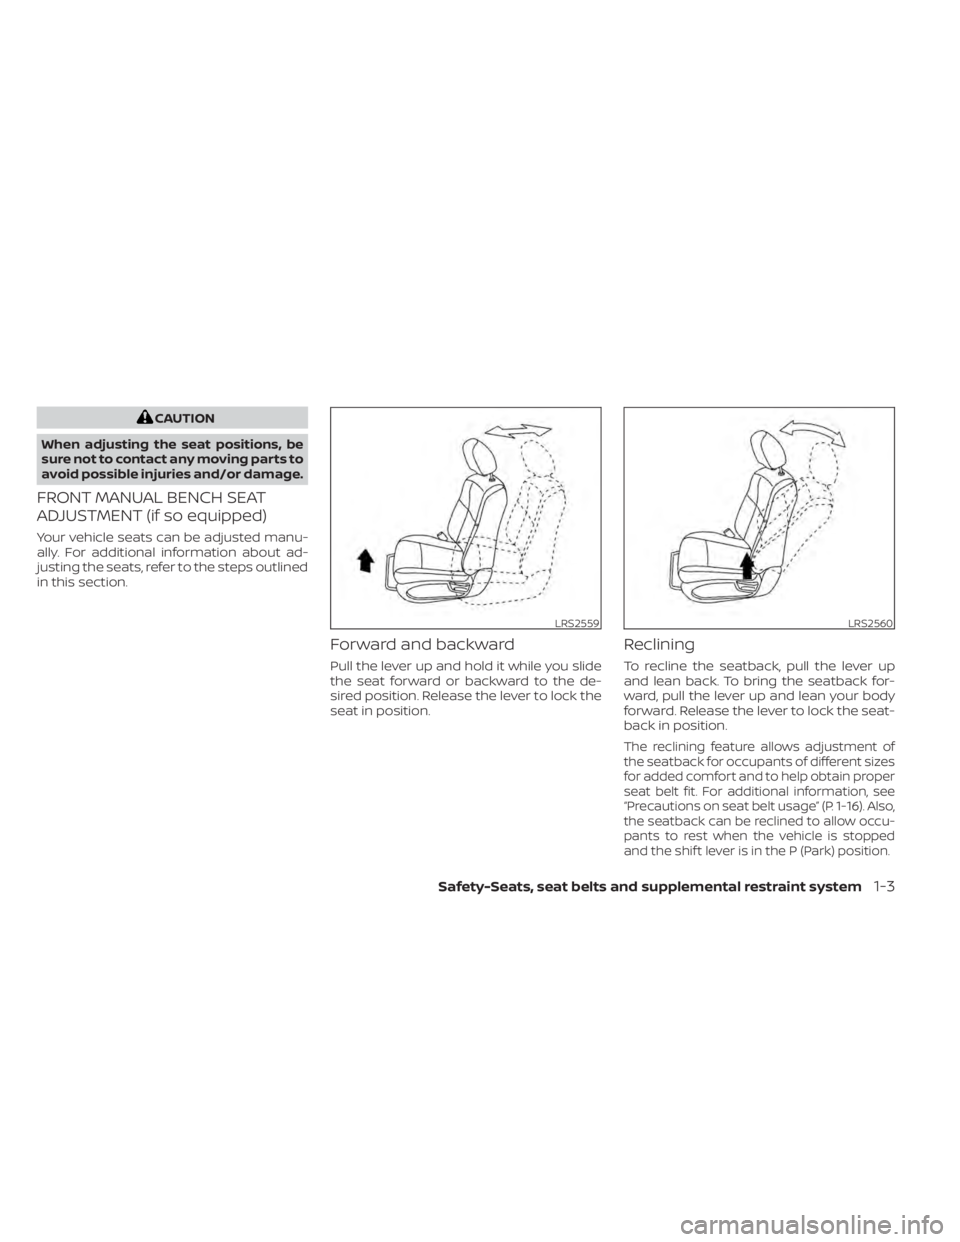 NISSAN TITAN 2021  Owner´s Manual CAUTION
When adjusting the seat positions, be
sure not to contact any moving parts to
avoid possible injuries and/or damage.
FRONT MANUAL BENCH SEAT
ADJUSTMENT (if so equipped)
Your vehicle seats can 